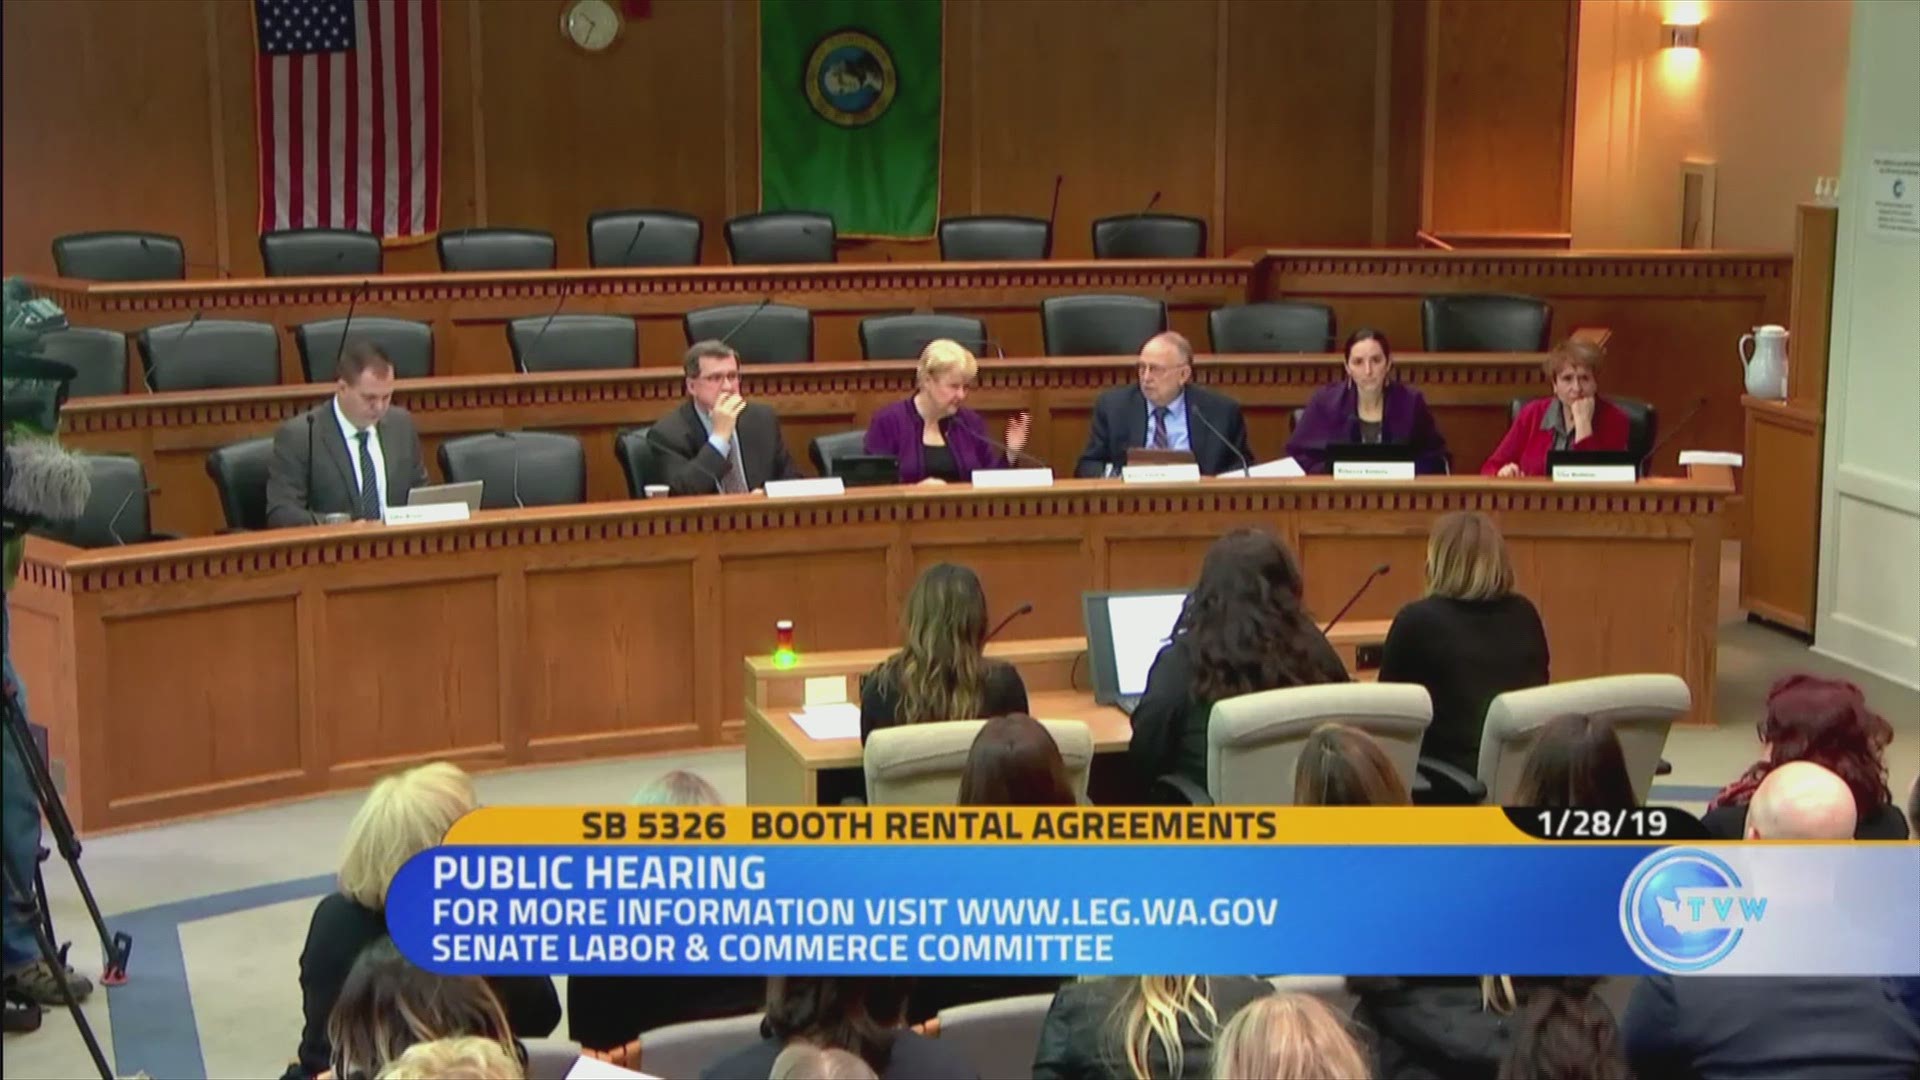 Hair stylists and cosmetologists spoke for and against Senate Bill 5326. (Source: TVW)